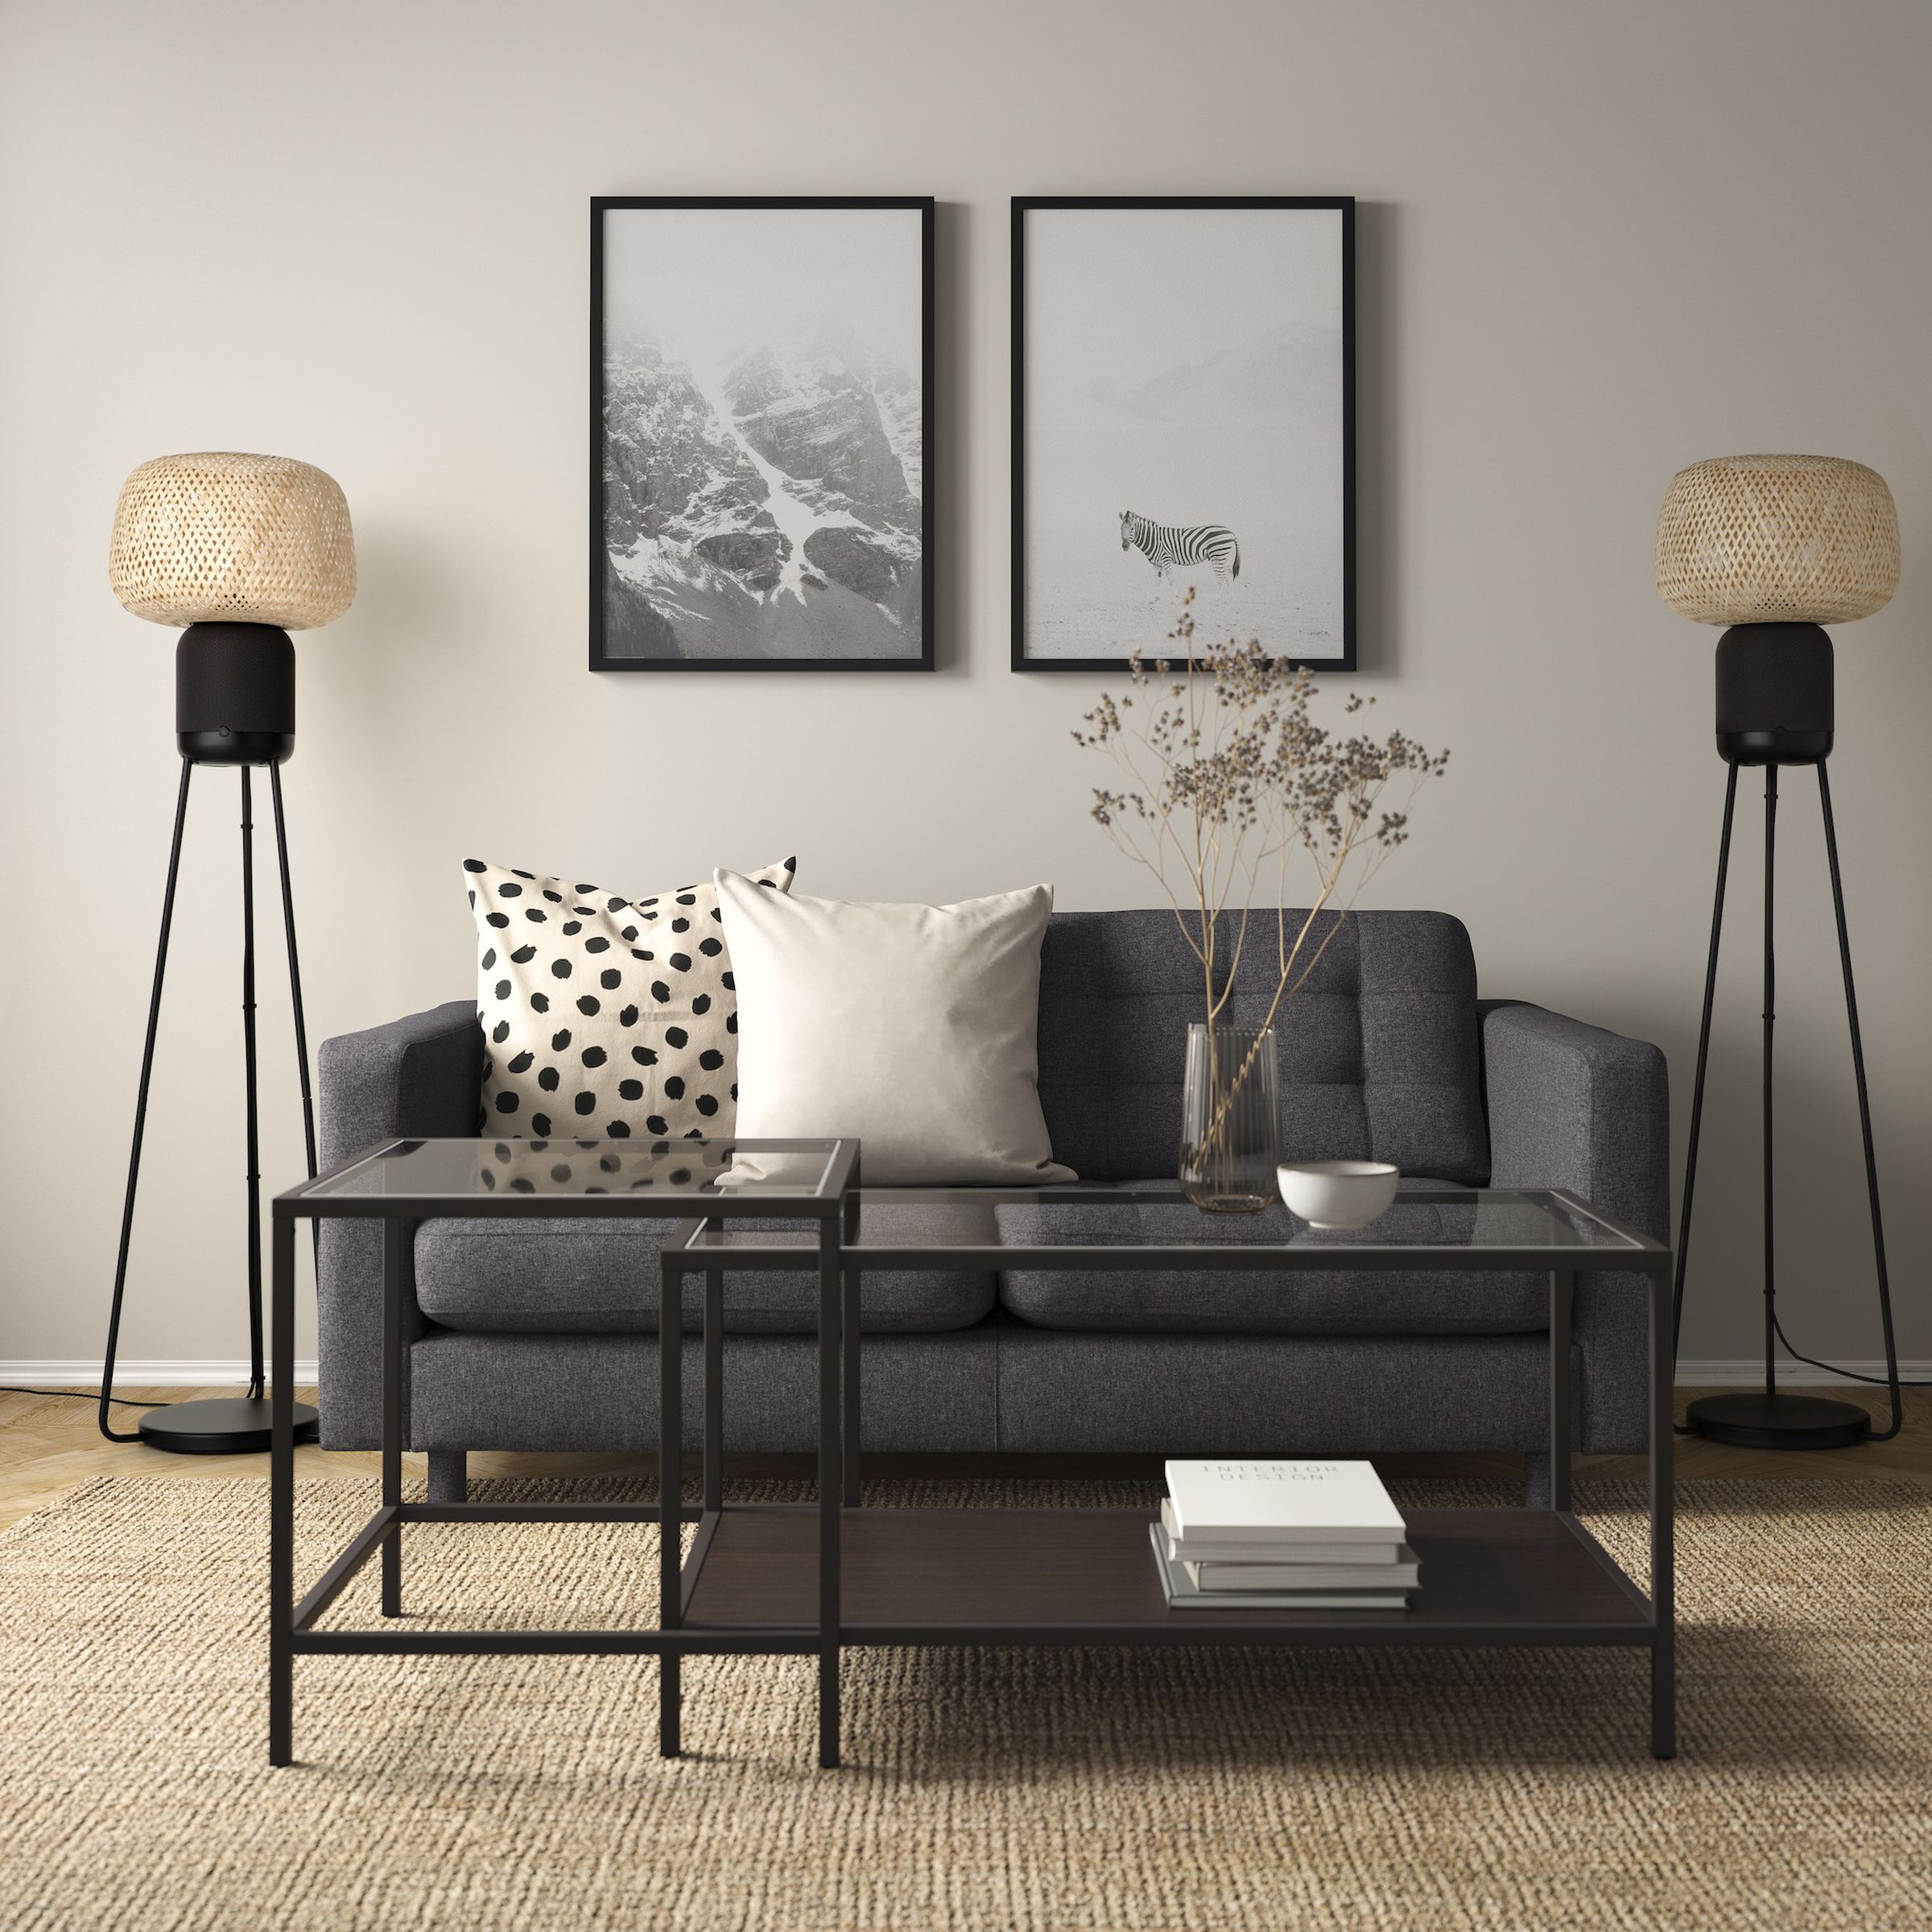 An image of two Symfonisk floor lamp speakers, one on each side of a couch.